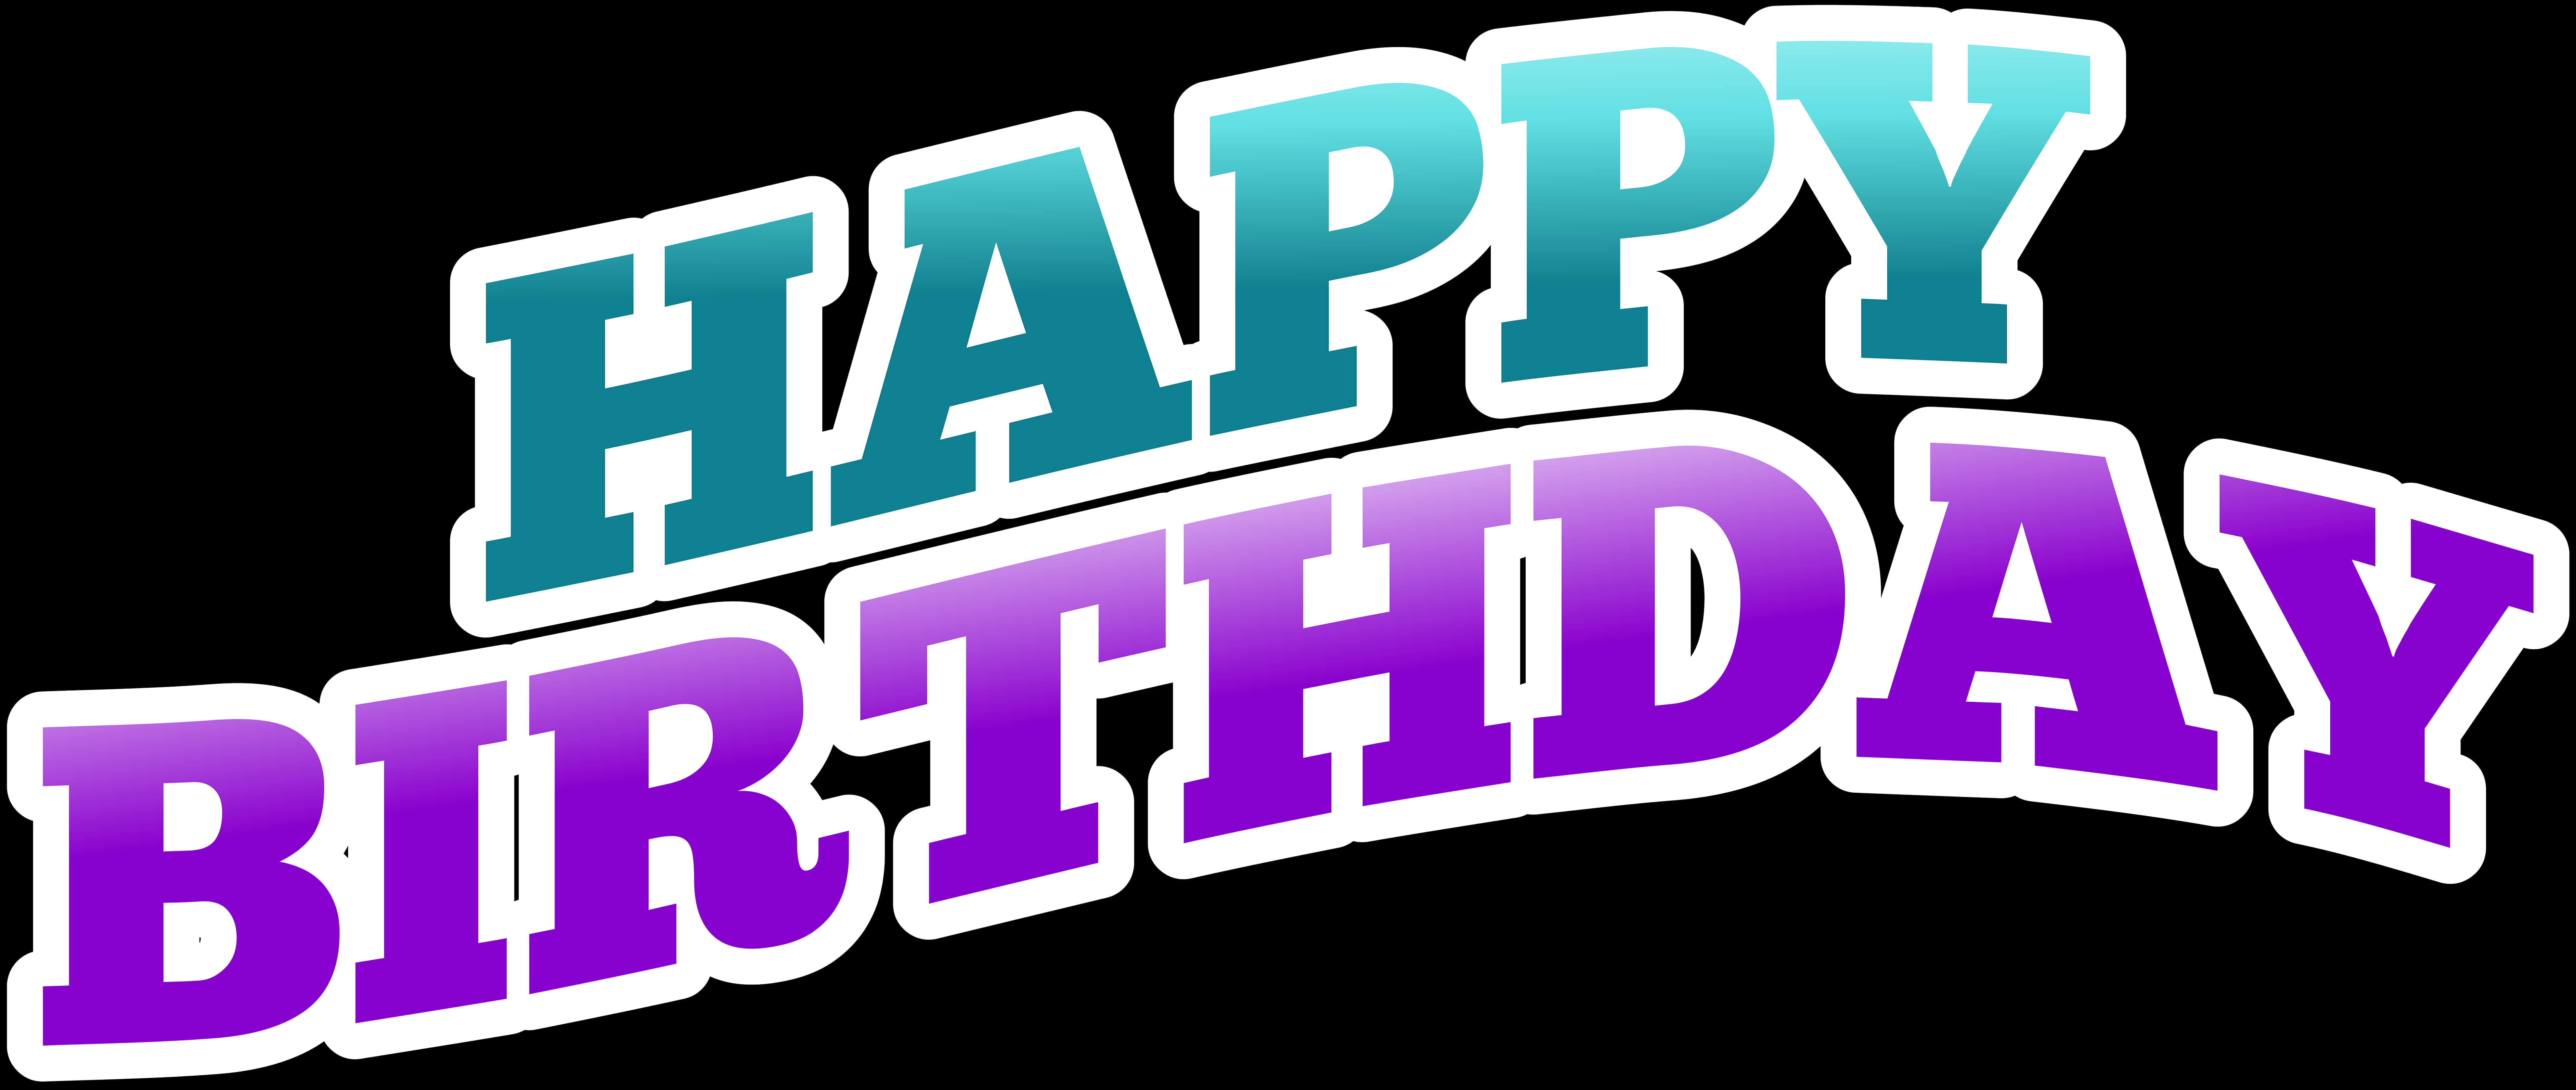 Colorful Happy Birthday Text Banner